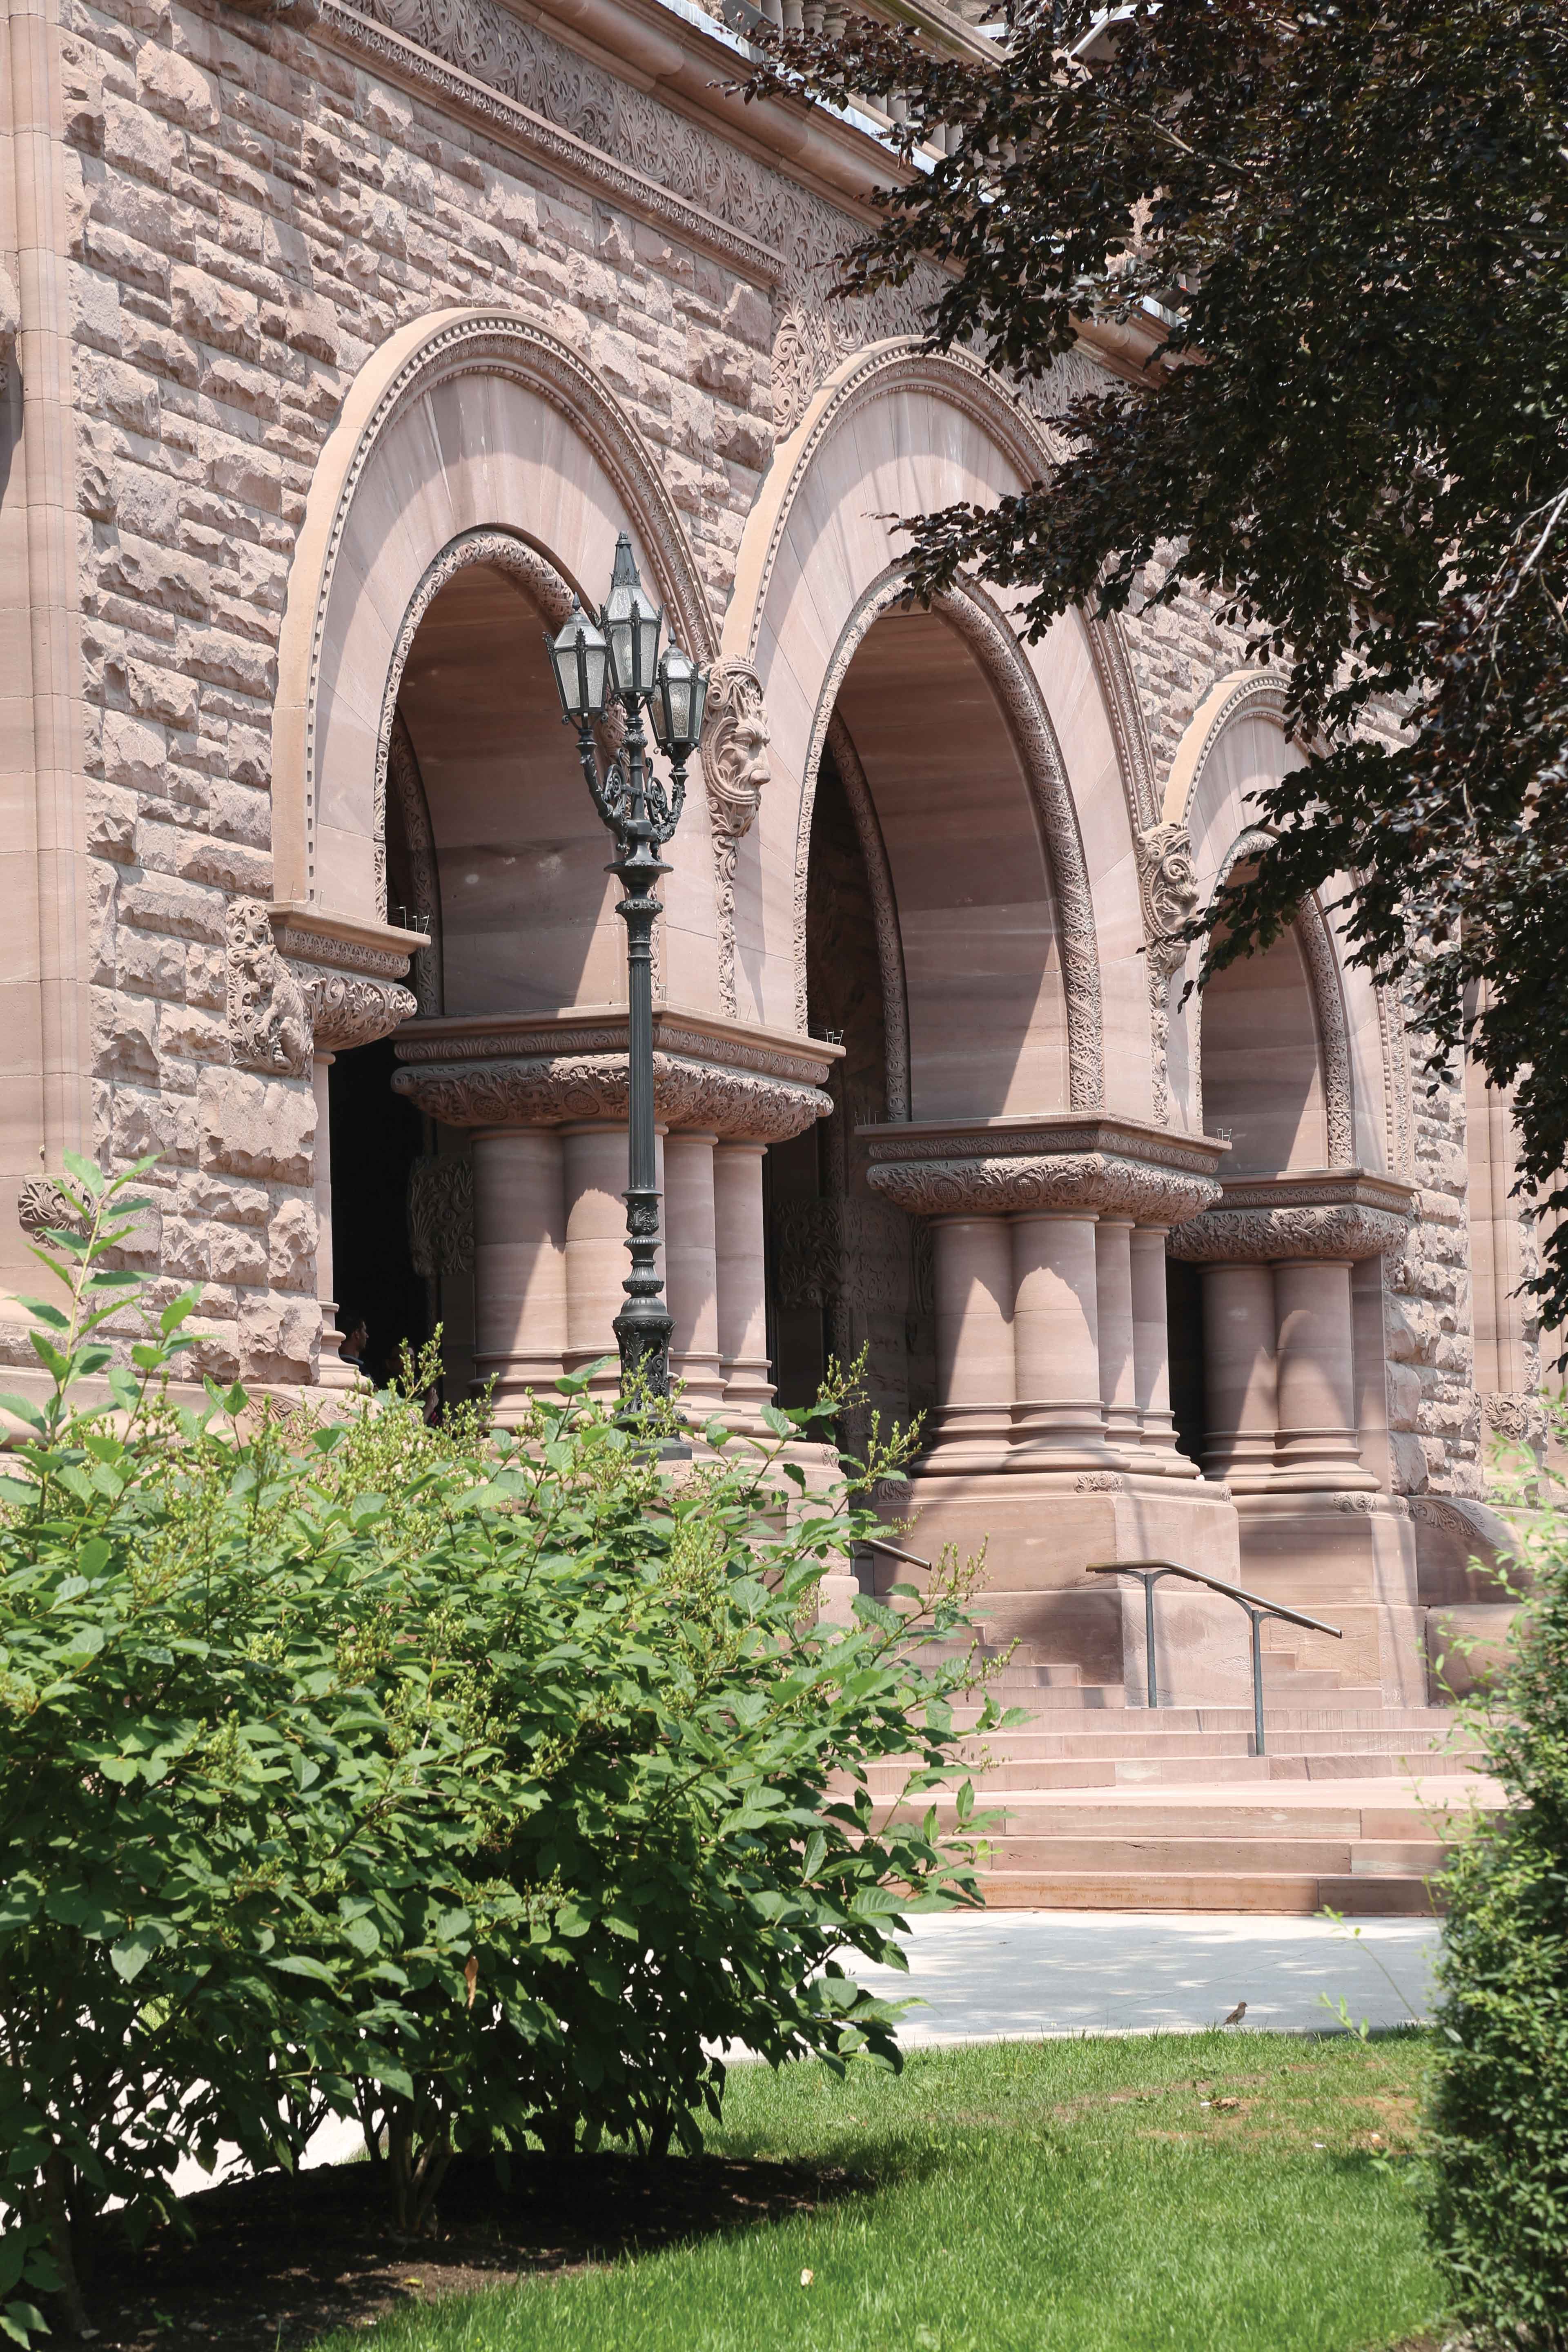 The sandstone arches on the front entrance of the Legislative building.